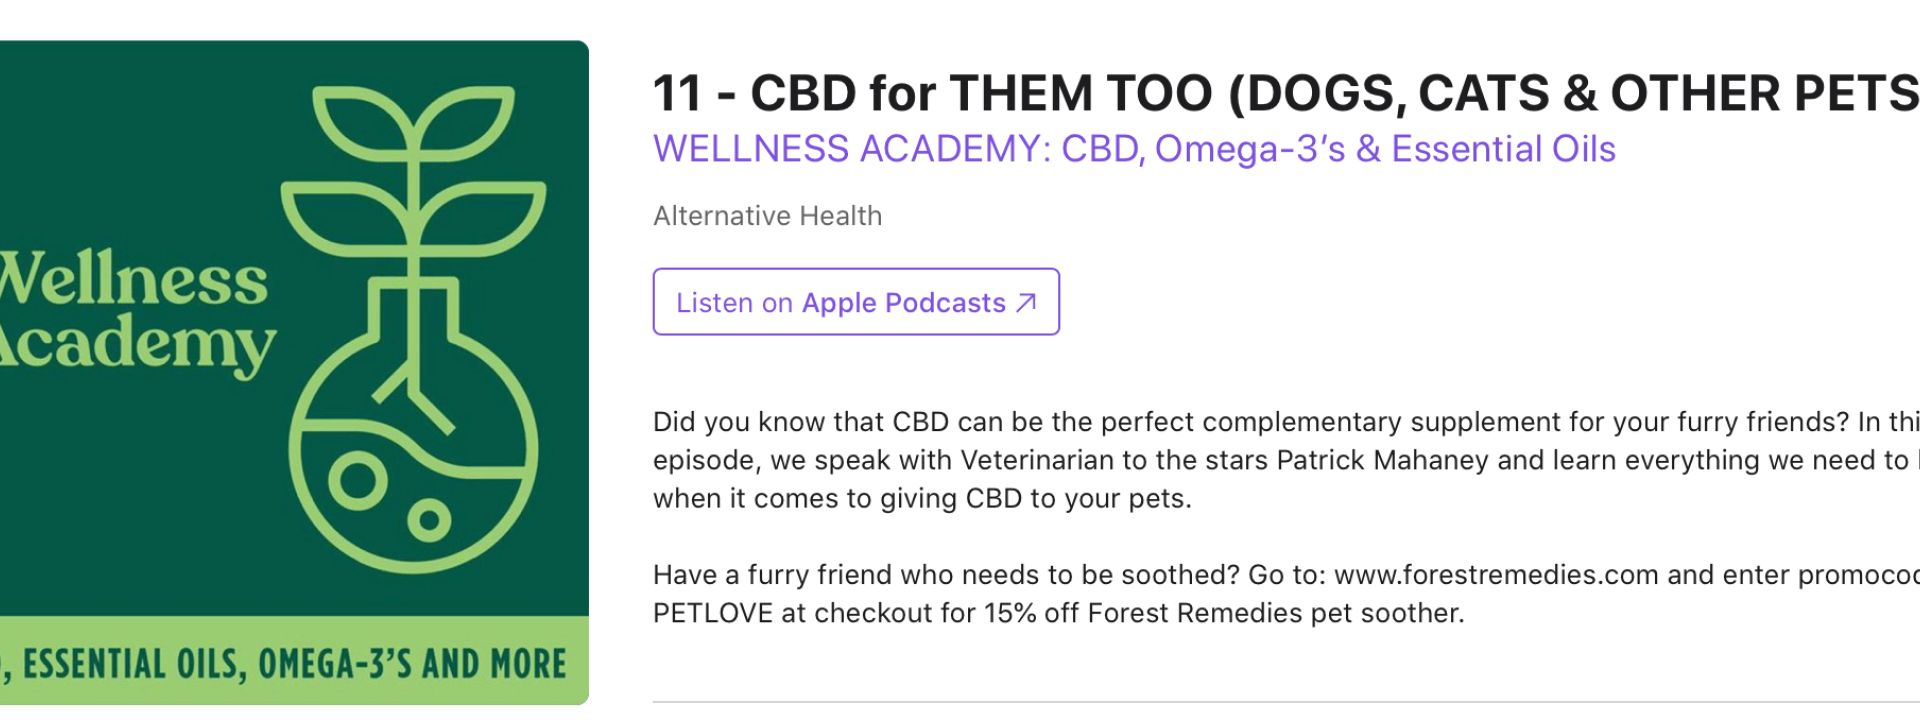 Wellness Academy Podcast CBD for THEM TOO (DOGS, CATS & OTHER PETS)